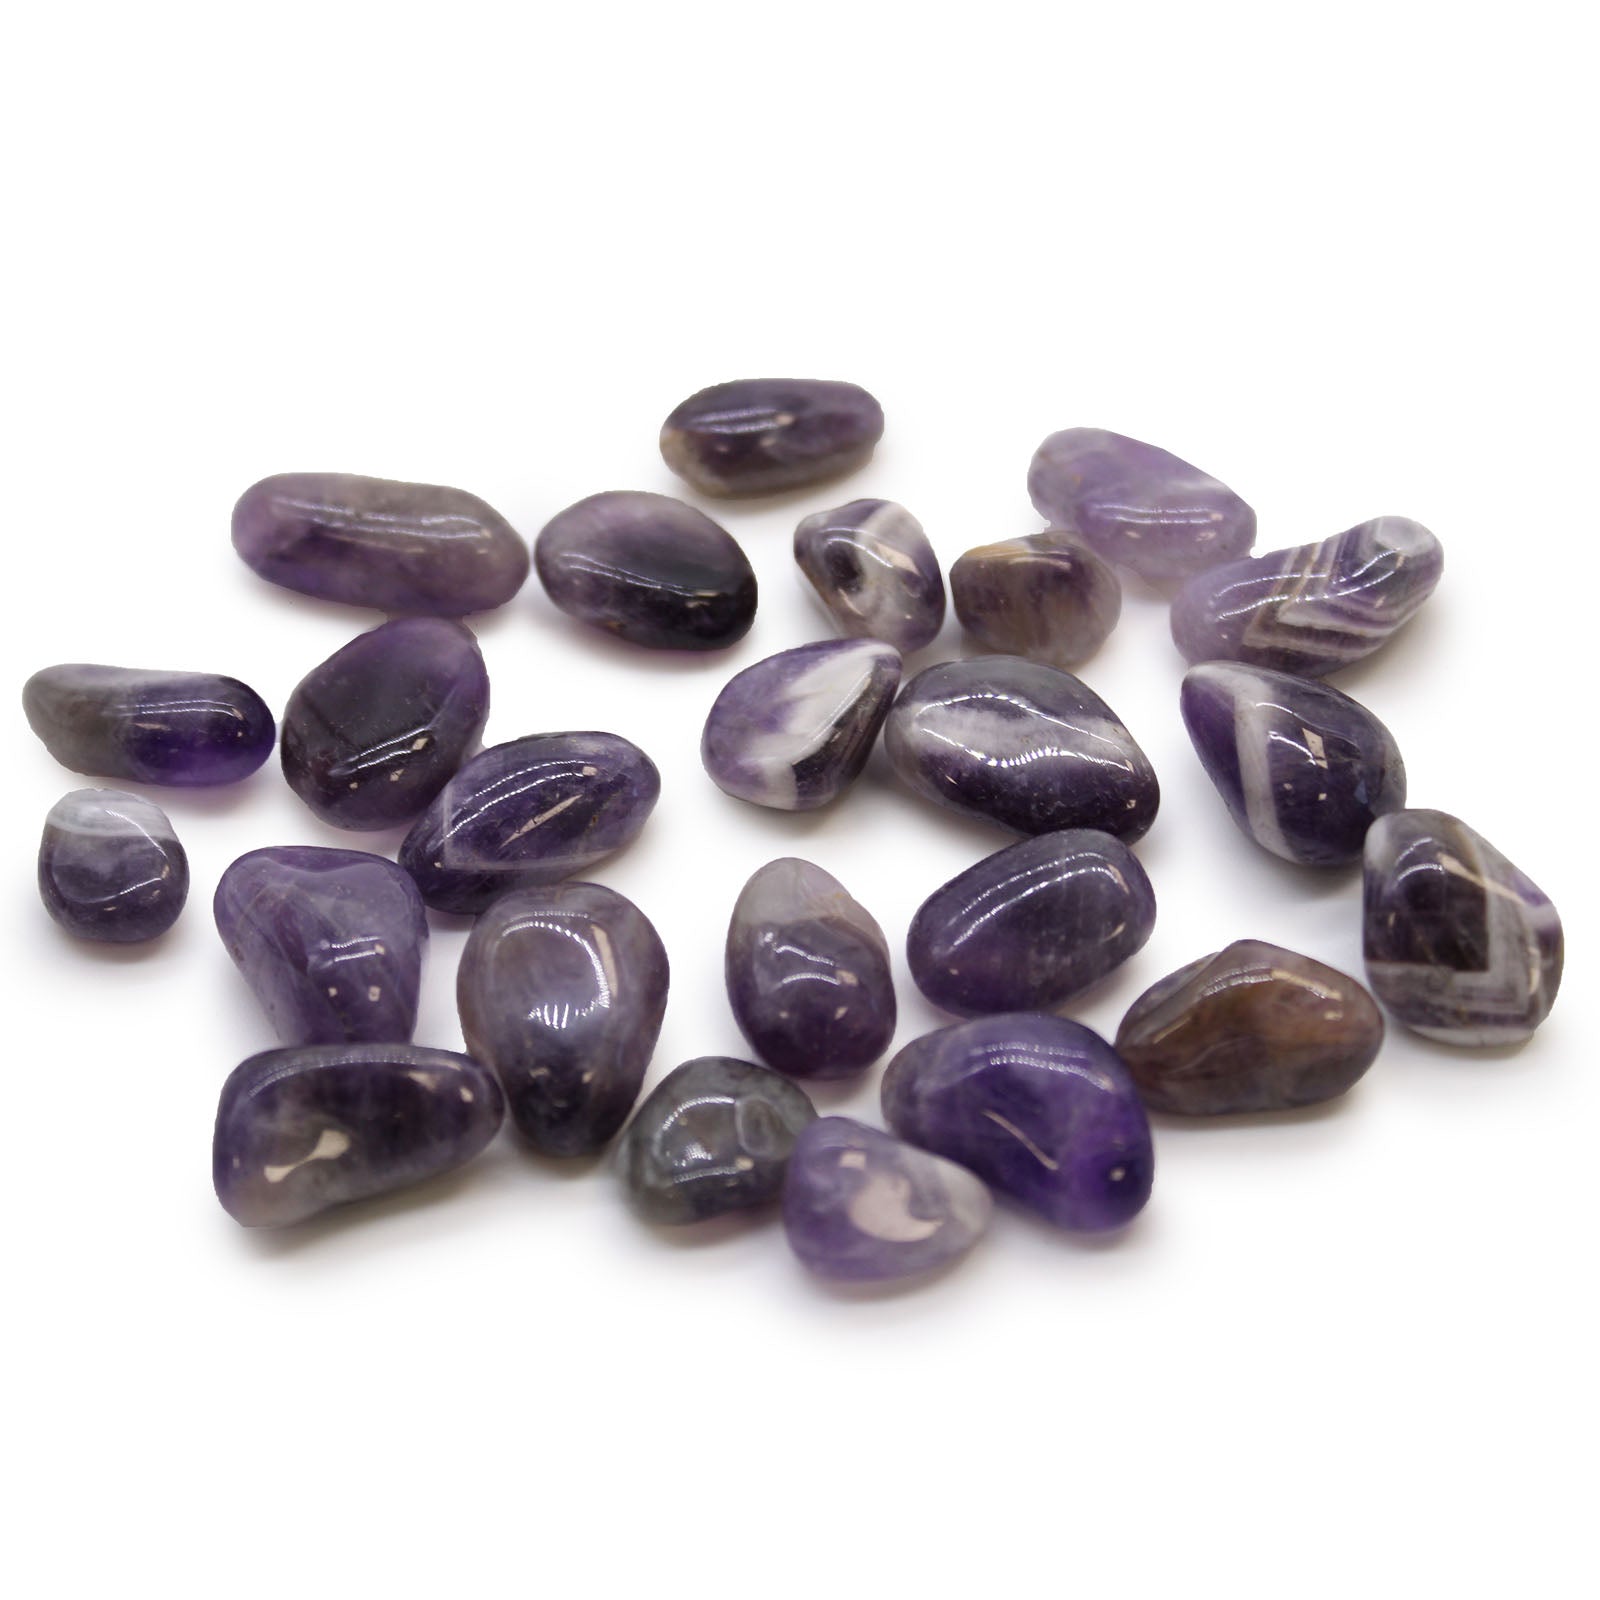 View Small African Tumble Stones Amethyst information